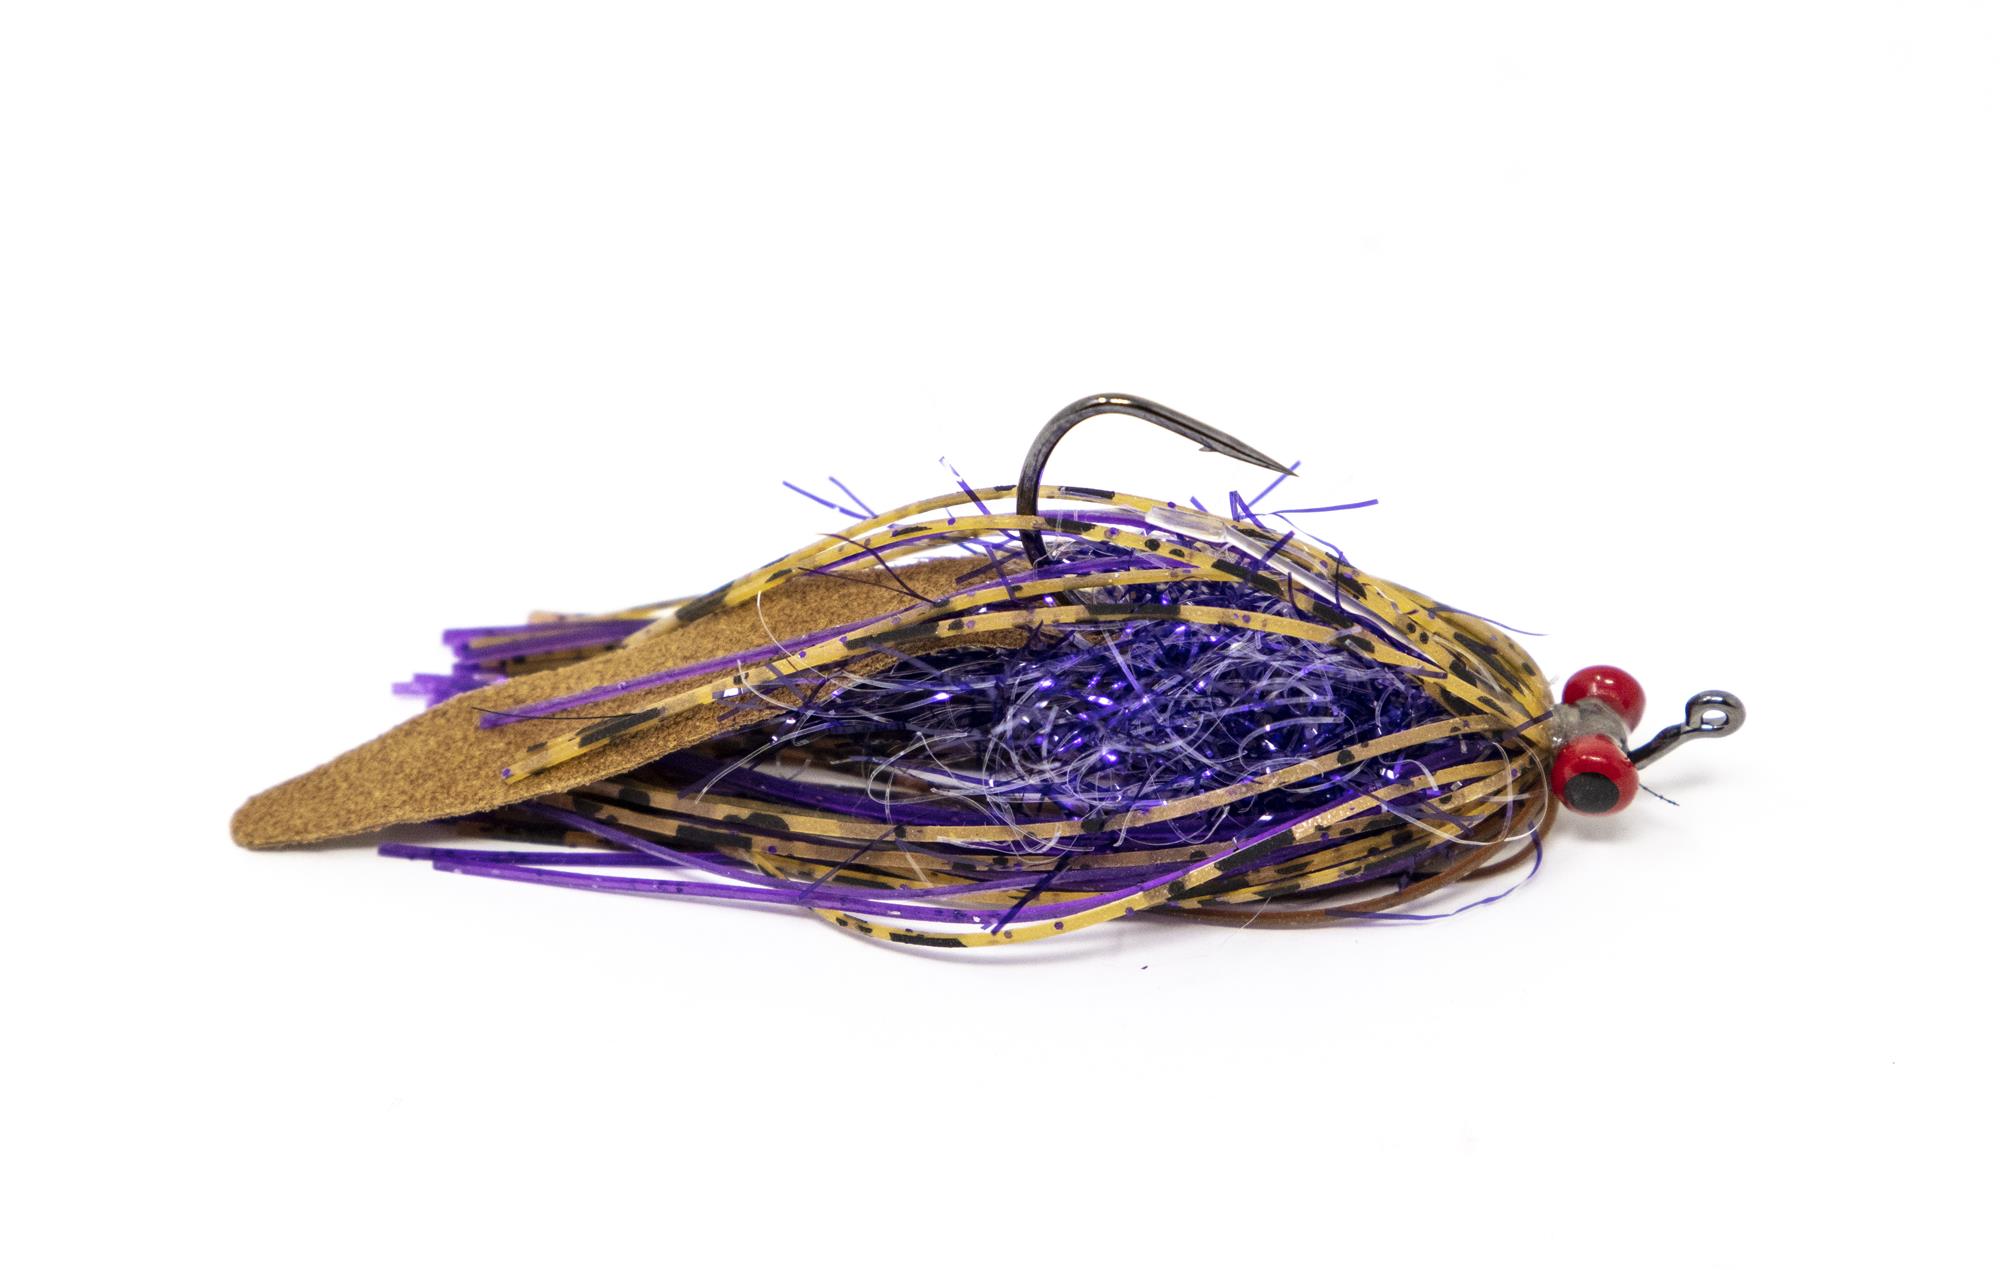 10 Best Fly Fishing Flies For Largemouth Bass